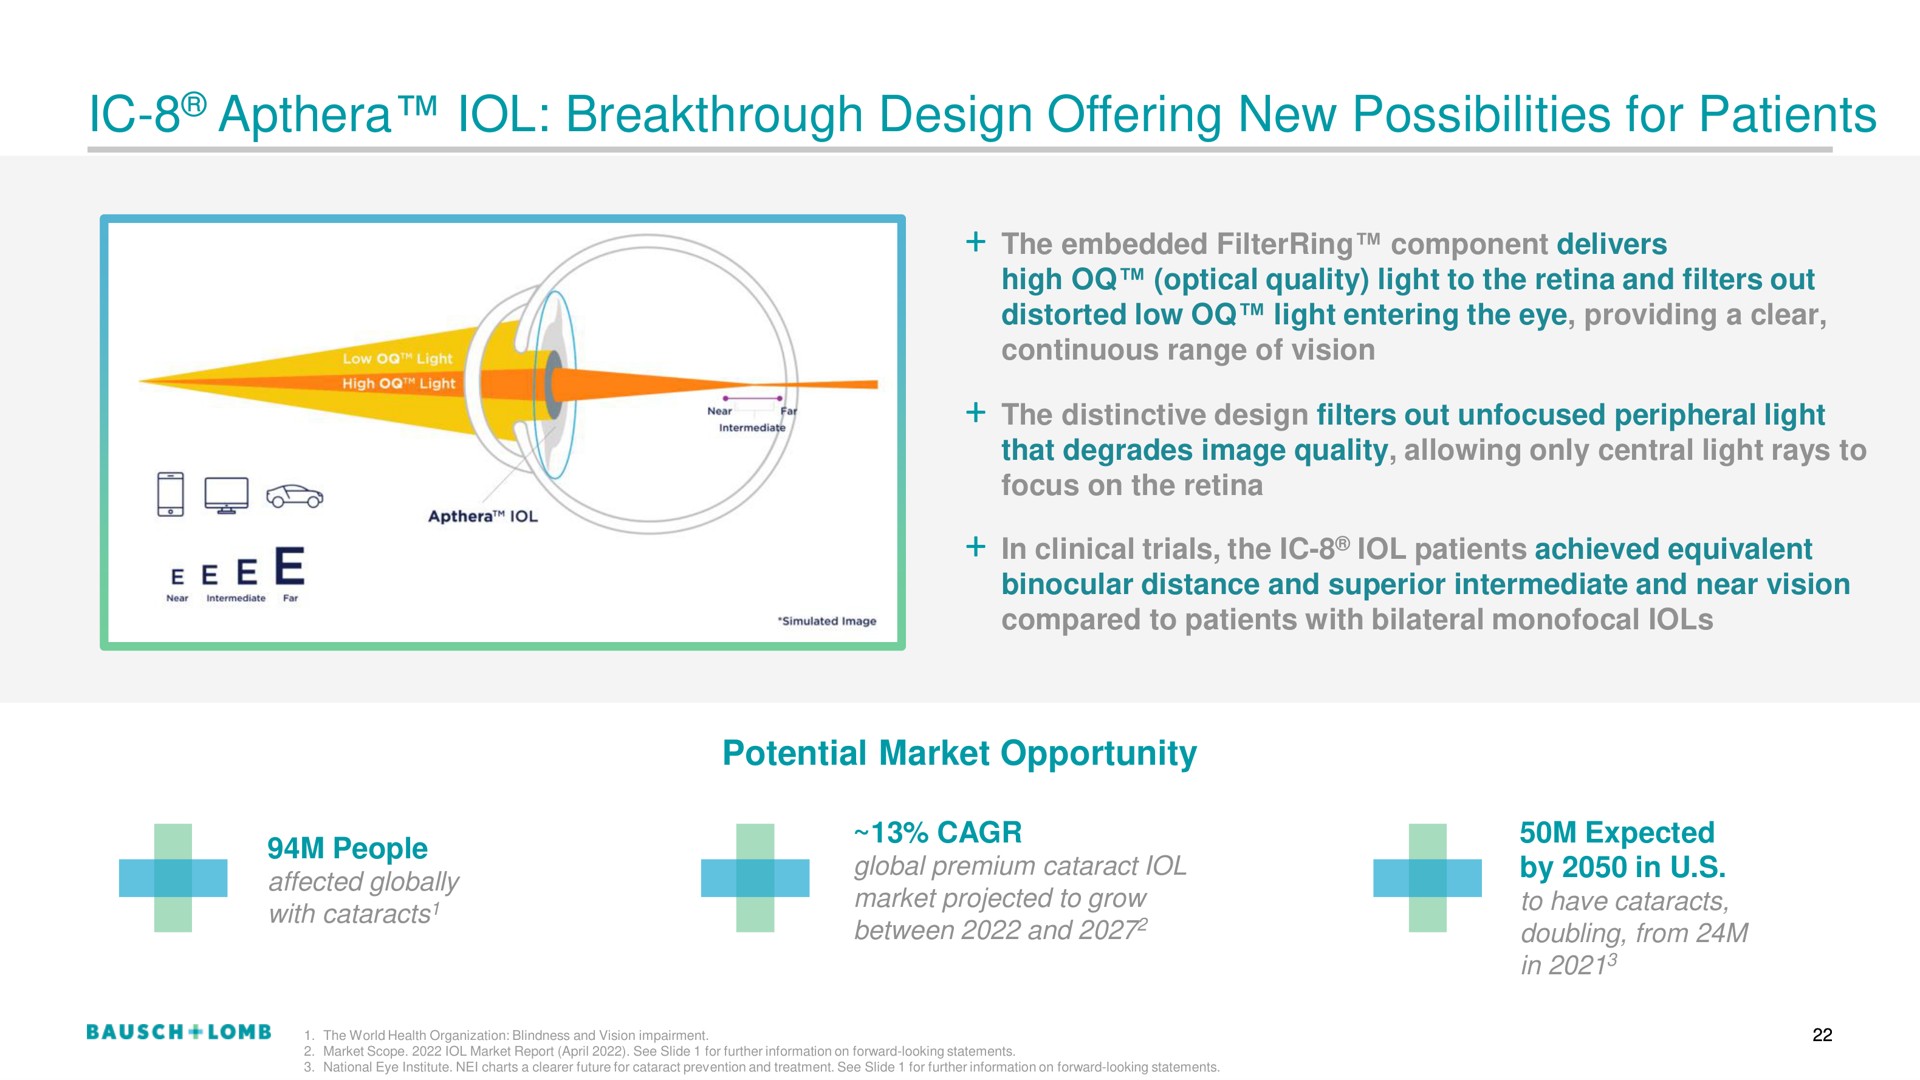 breakthrough design offering new possibilities for patients | Bausch+Lomb